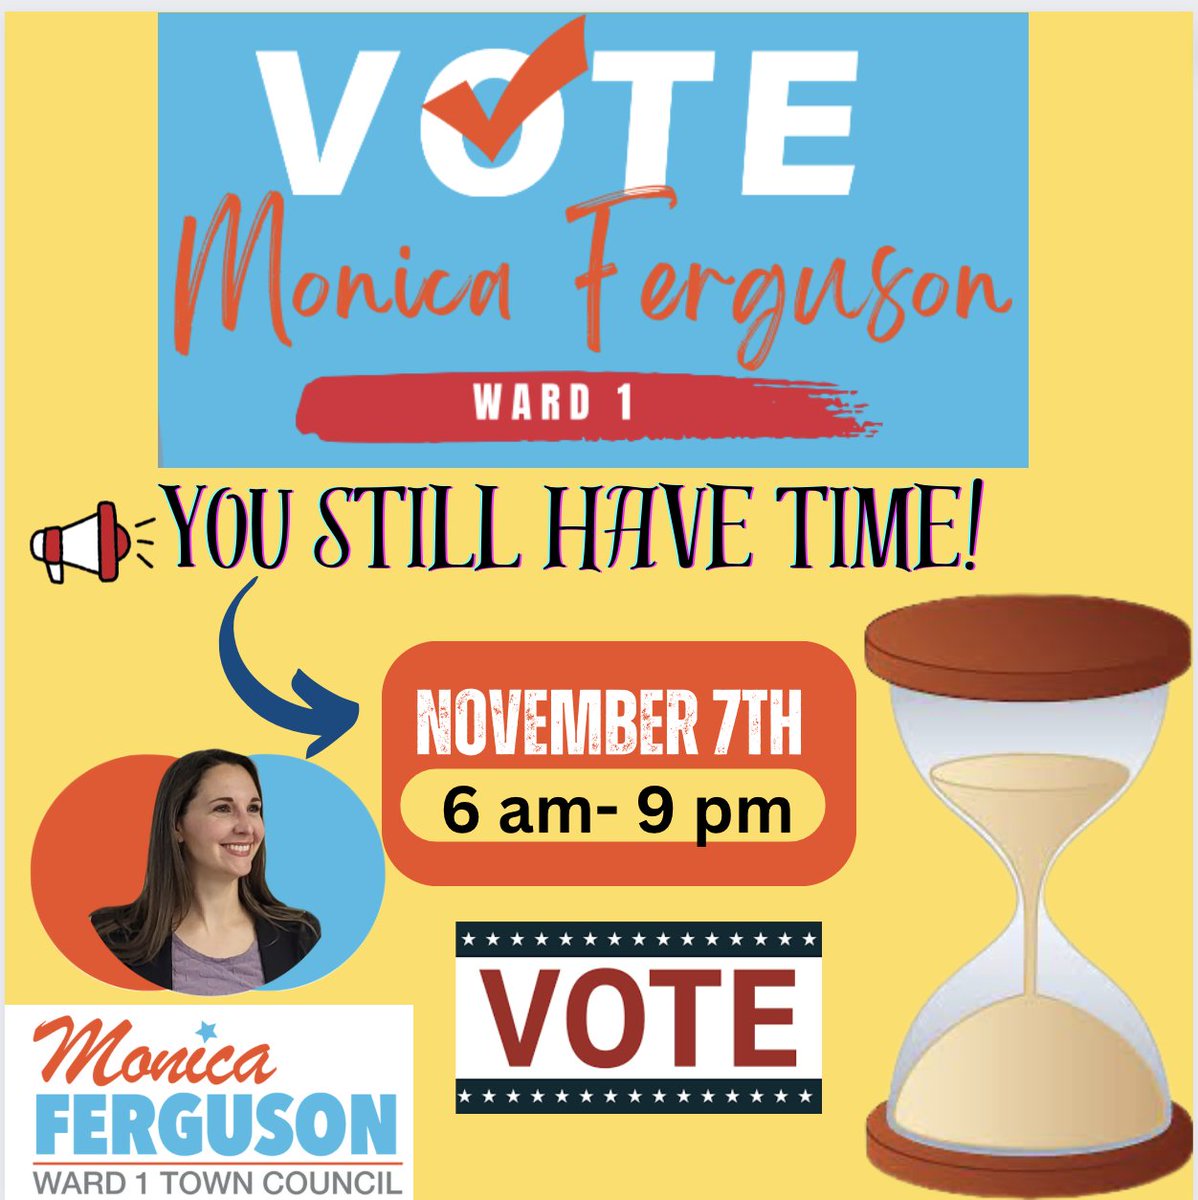 YOU STILL HAVE TIME! Get to the Polls by 9pm to cast your vote for Monica for Town Council! check your polling place here- vic.ntsdata.com/home/Rockland or here voterlookup.elections.ny.gov #NewCity #Clarkstown #monicafortowncouncil #fergusonforclarkstown #ward1